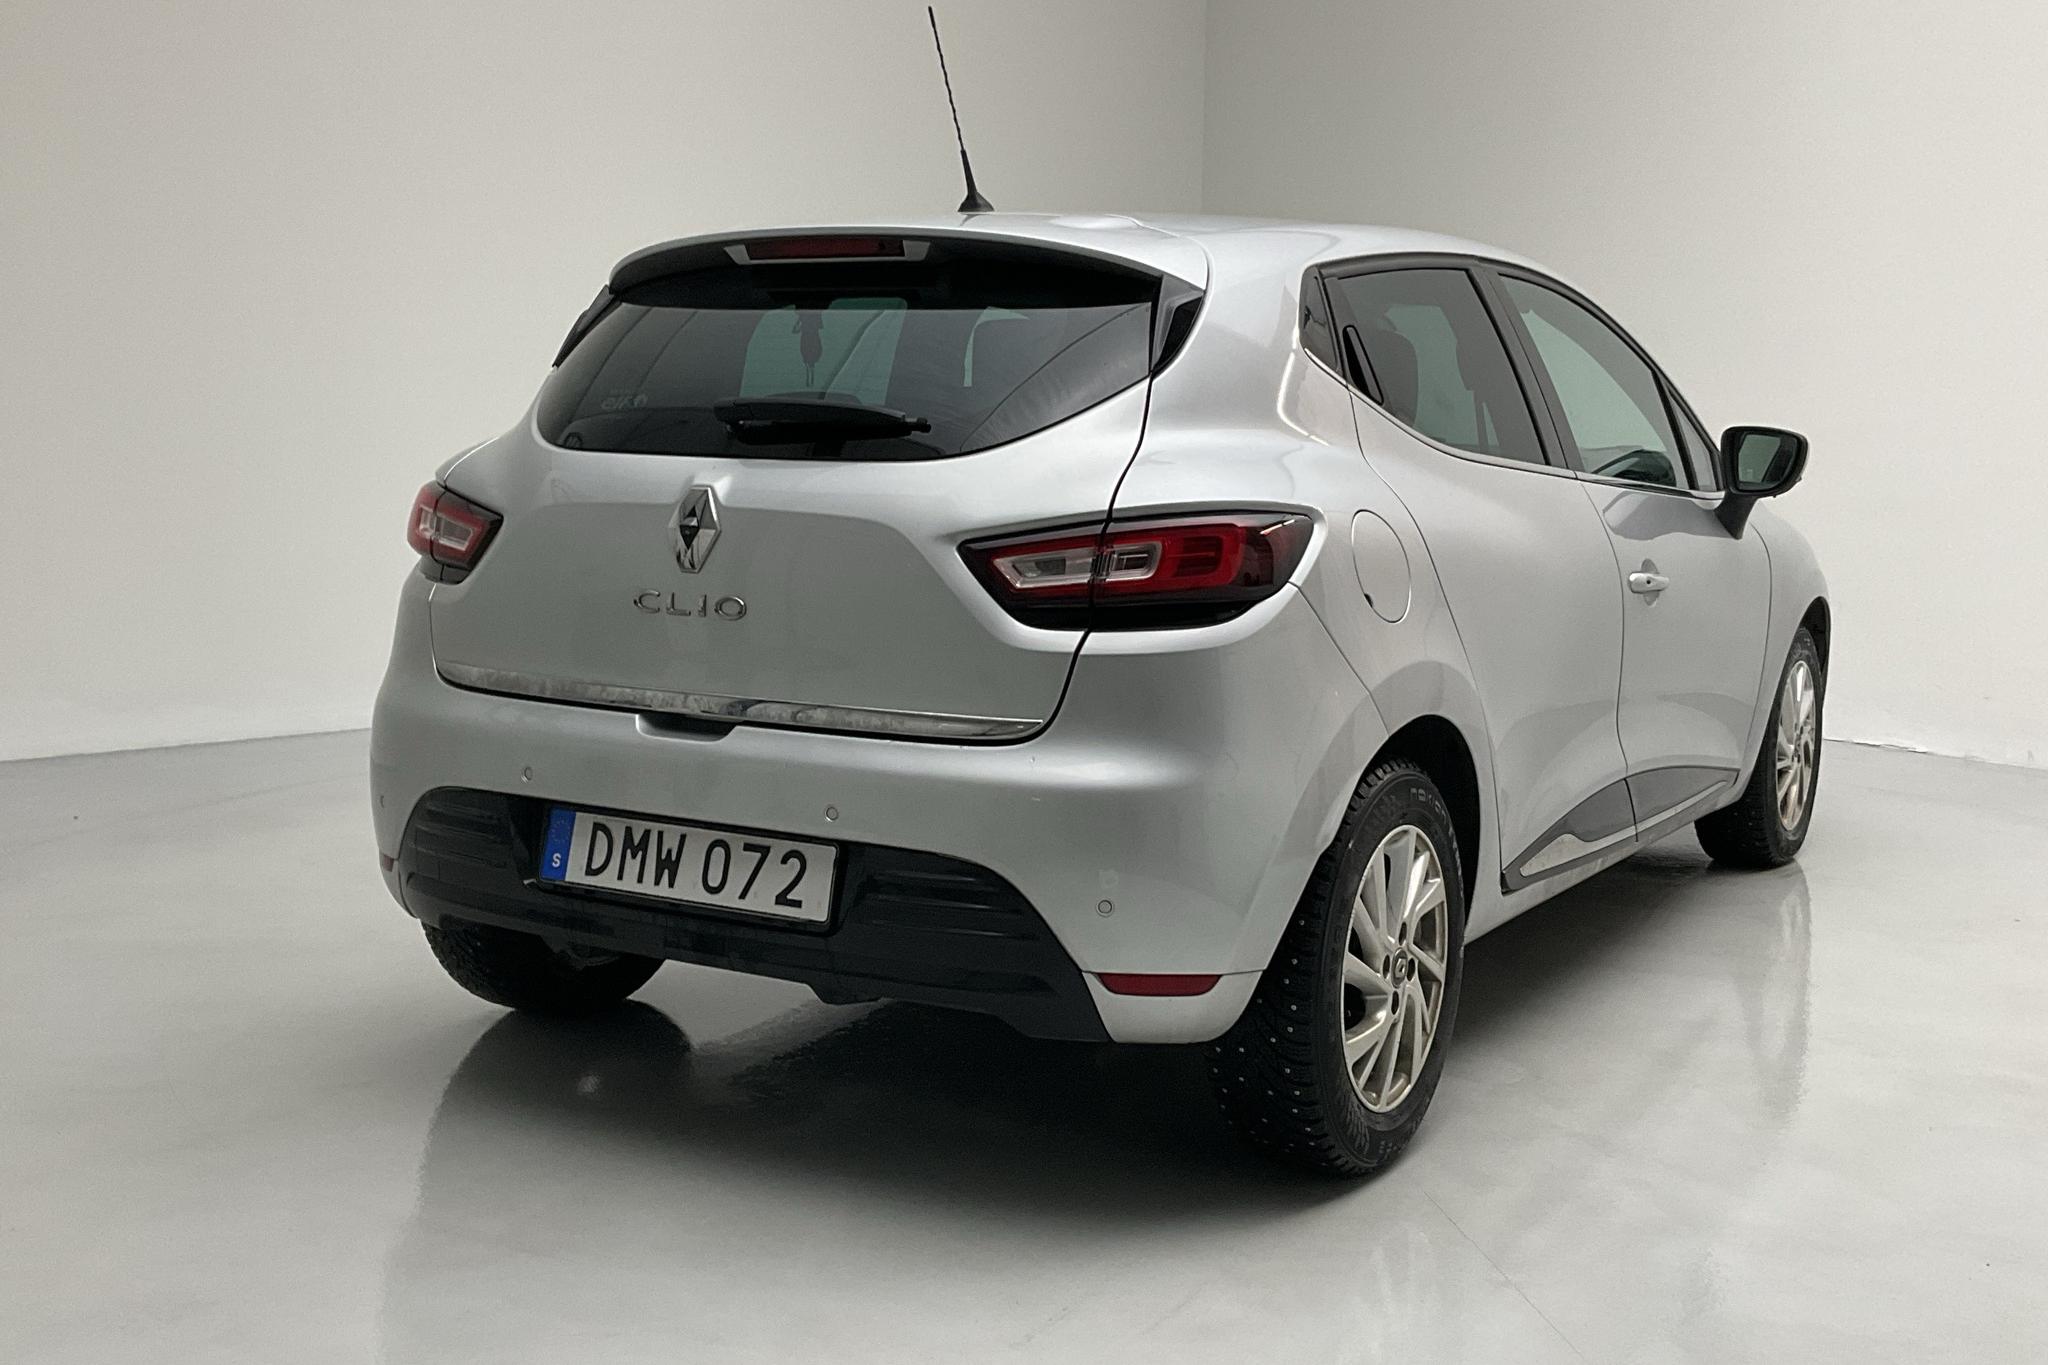 Renault Clio IV 0.9 TCe 90 5dr (90hk) - 65 080 km - Manual - silver - 2018